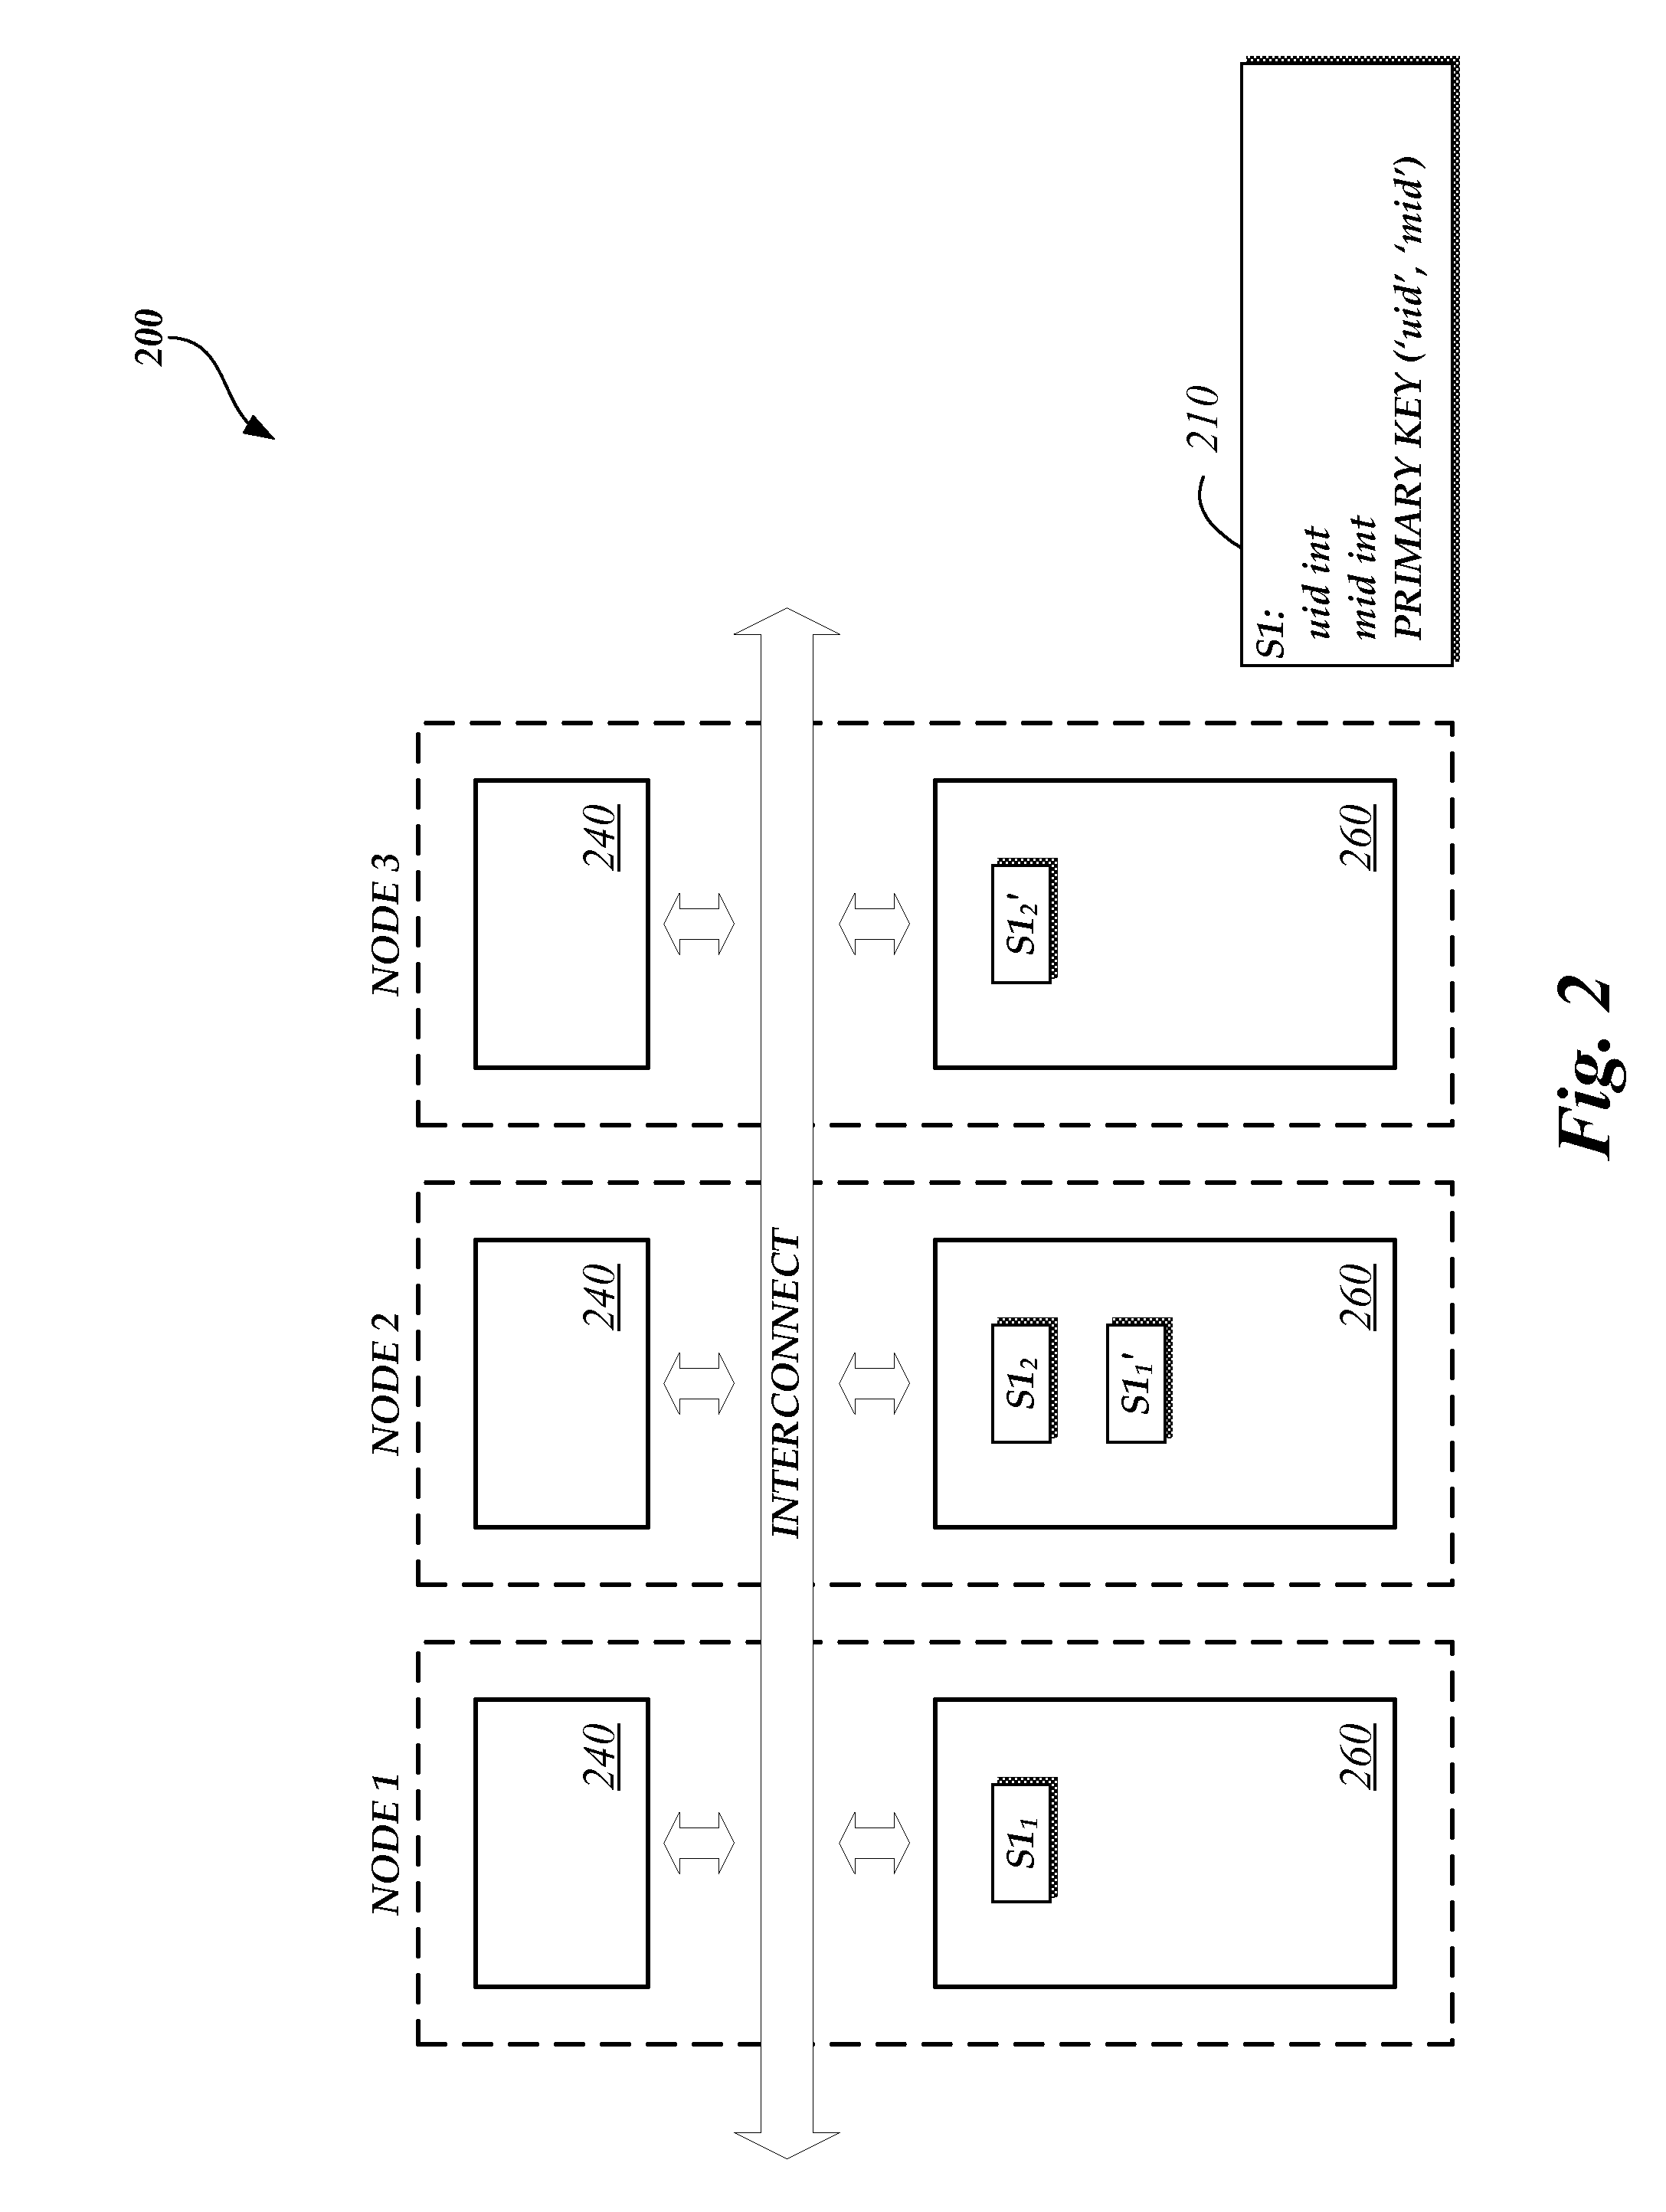 Systems and methods for reslicing data in a relational database